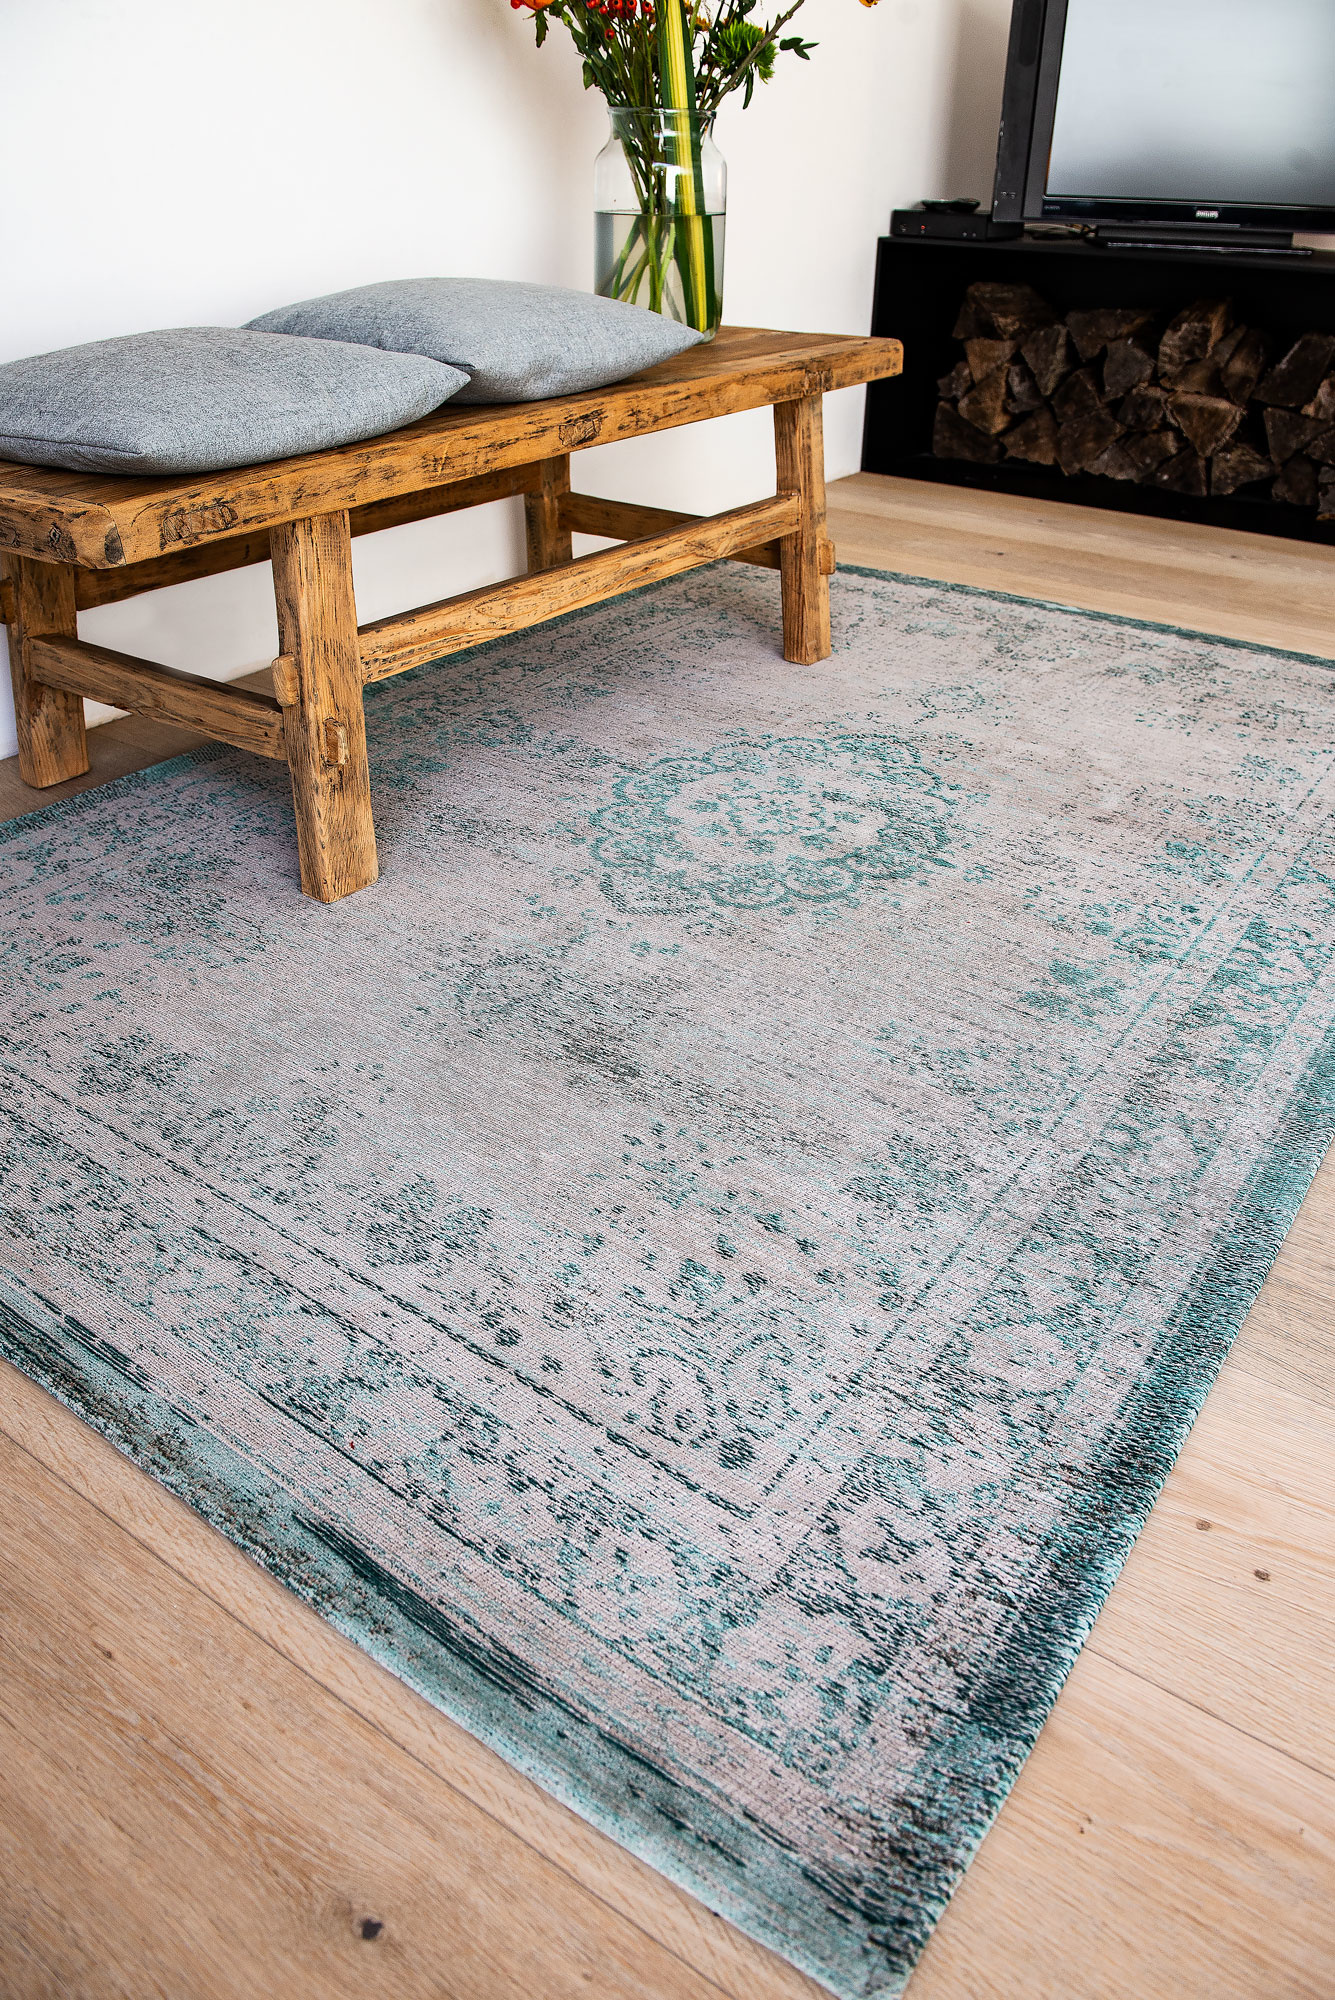 Medallion Turquoise Flatwoven Rug ☞ Size: 6' 7" x 9' 2" (200 x 280 cm)